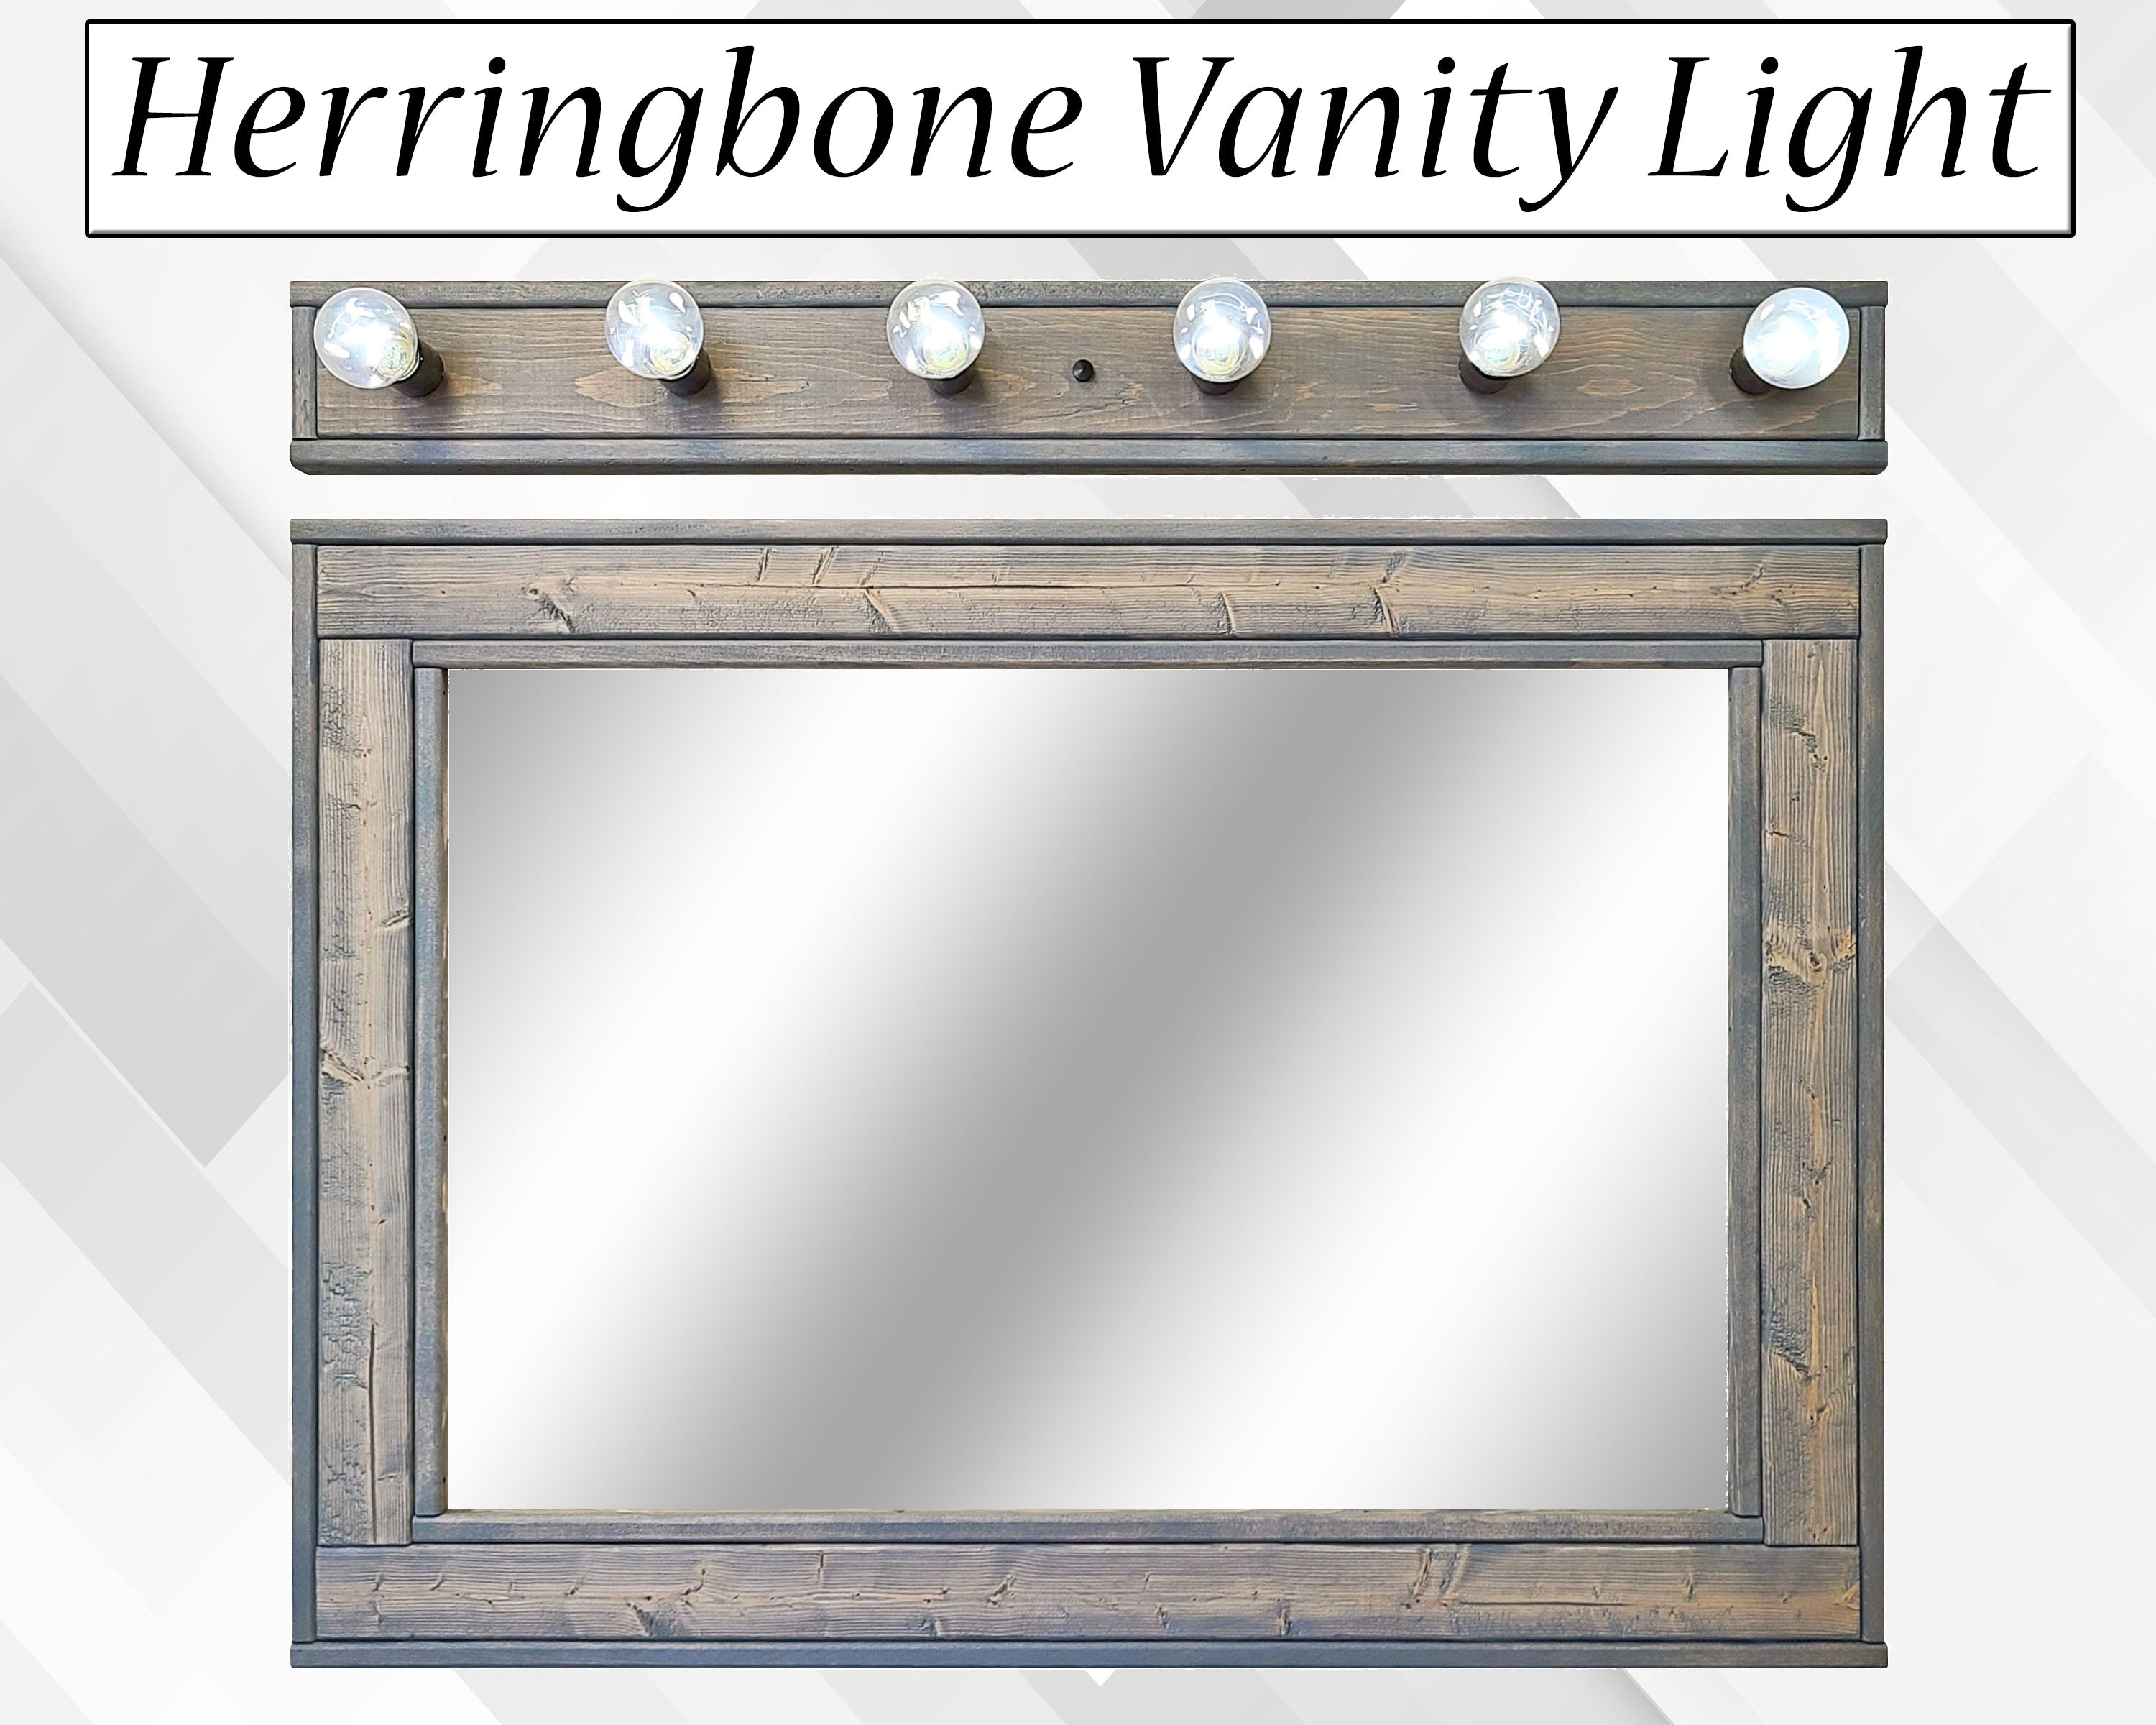 Customizable Herringbone Wall Mounted Vanity Light - Industrial Rustic Bathroom Decor, Various Colors & Sizes Available